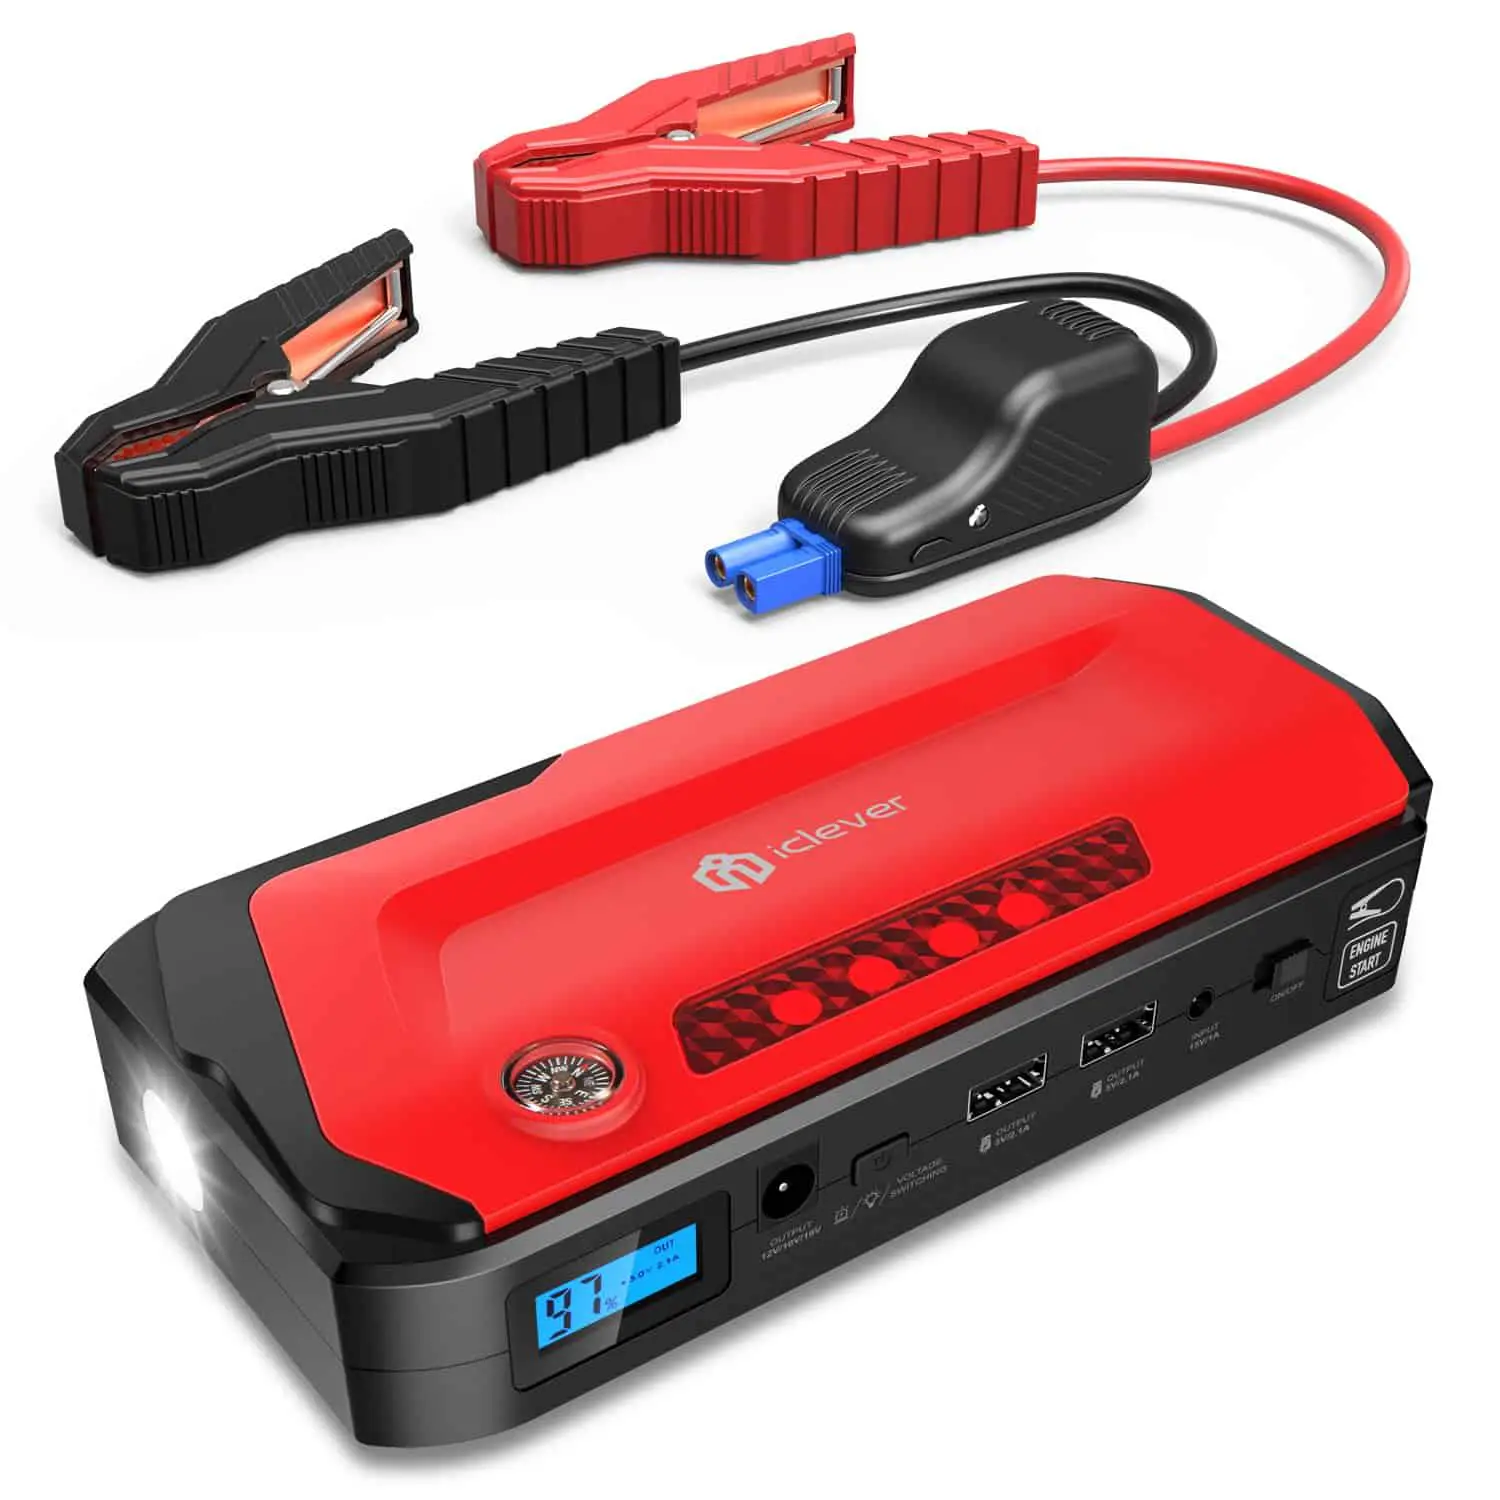 iClever 800A Peak 18000mAh Portable Jump Starter (up to 6.5L Gas Or 5.3L Diesel Engine) Auto Battery Booster, Portable Power Pack with LED Flashlight, Compass